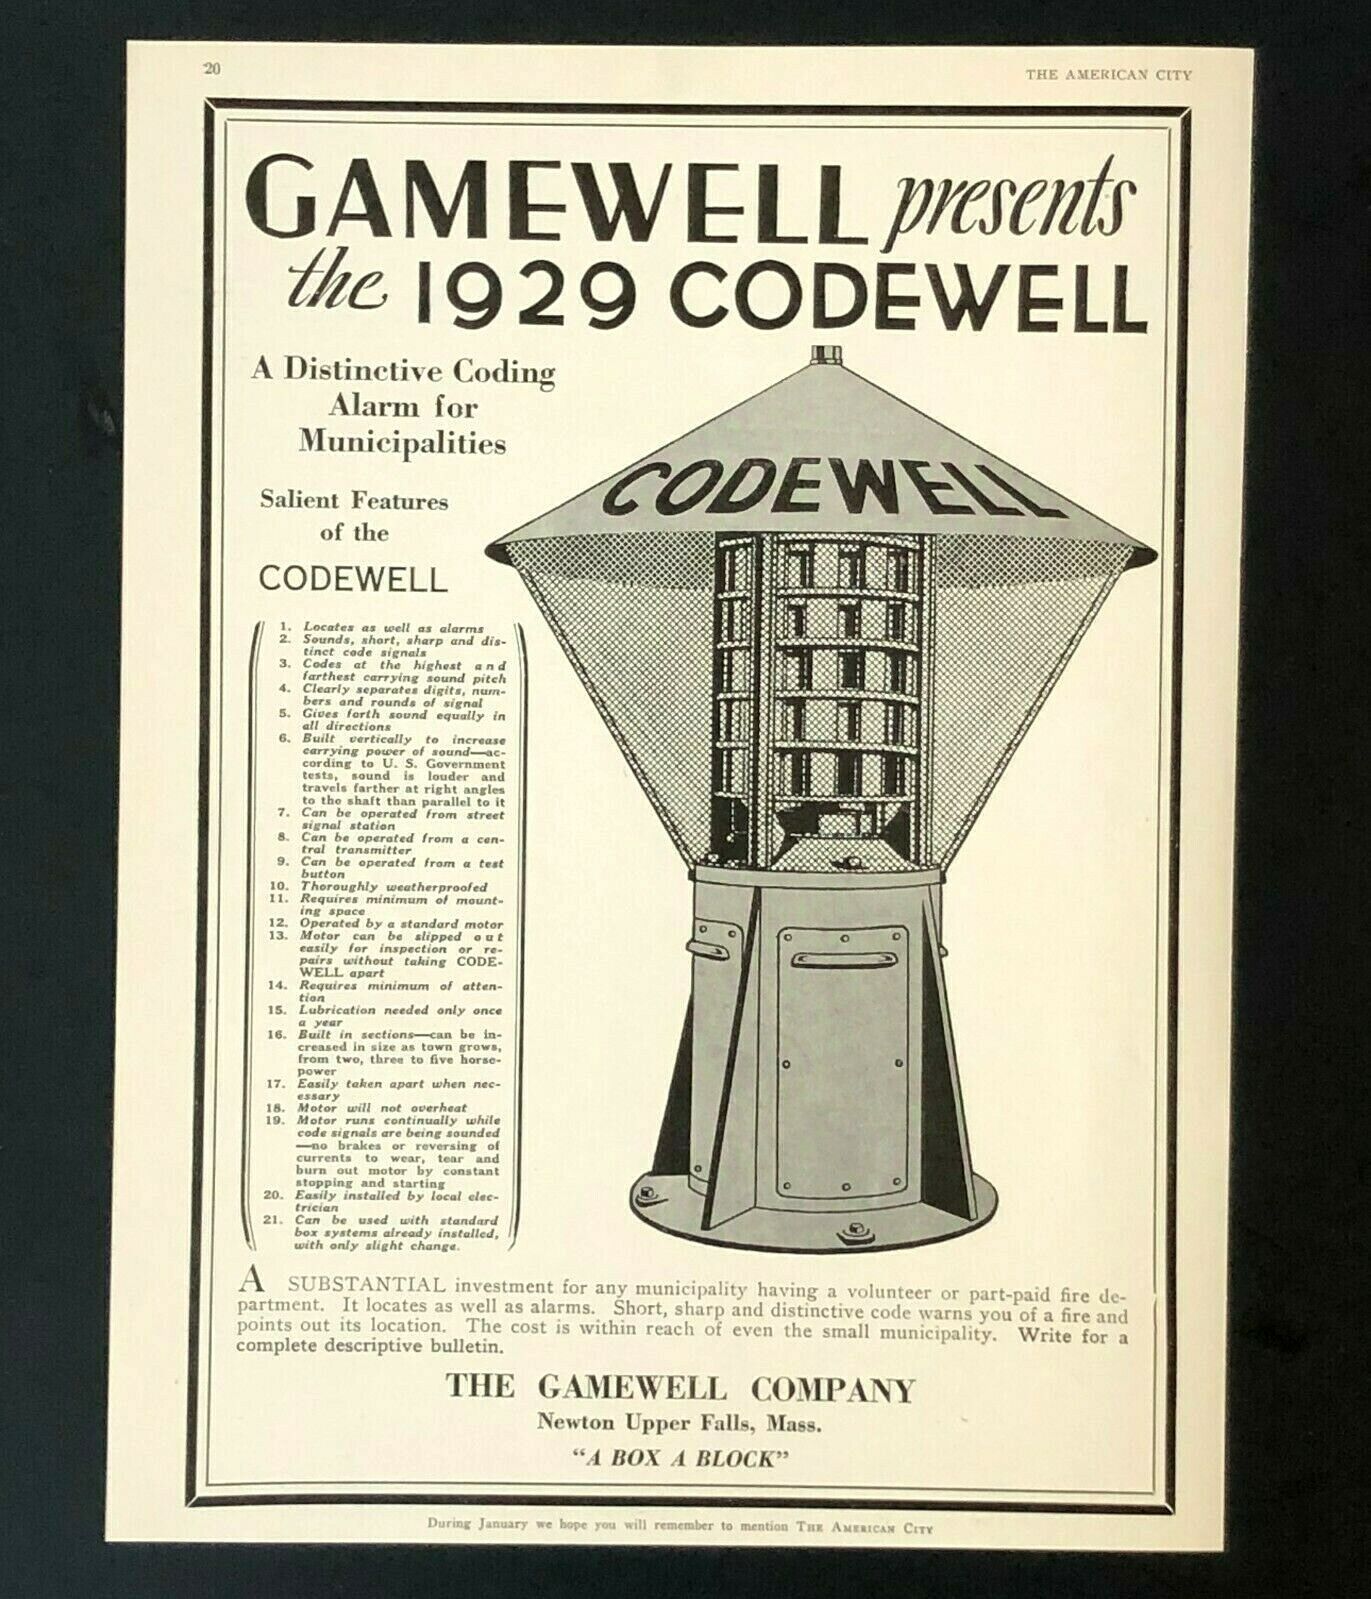 1929 Fire Coding Alarm Advertisement Gamewell Company Vintage Trade Print AD